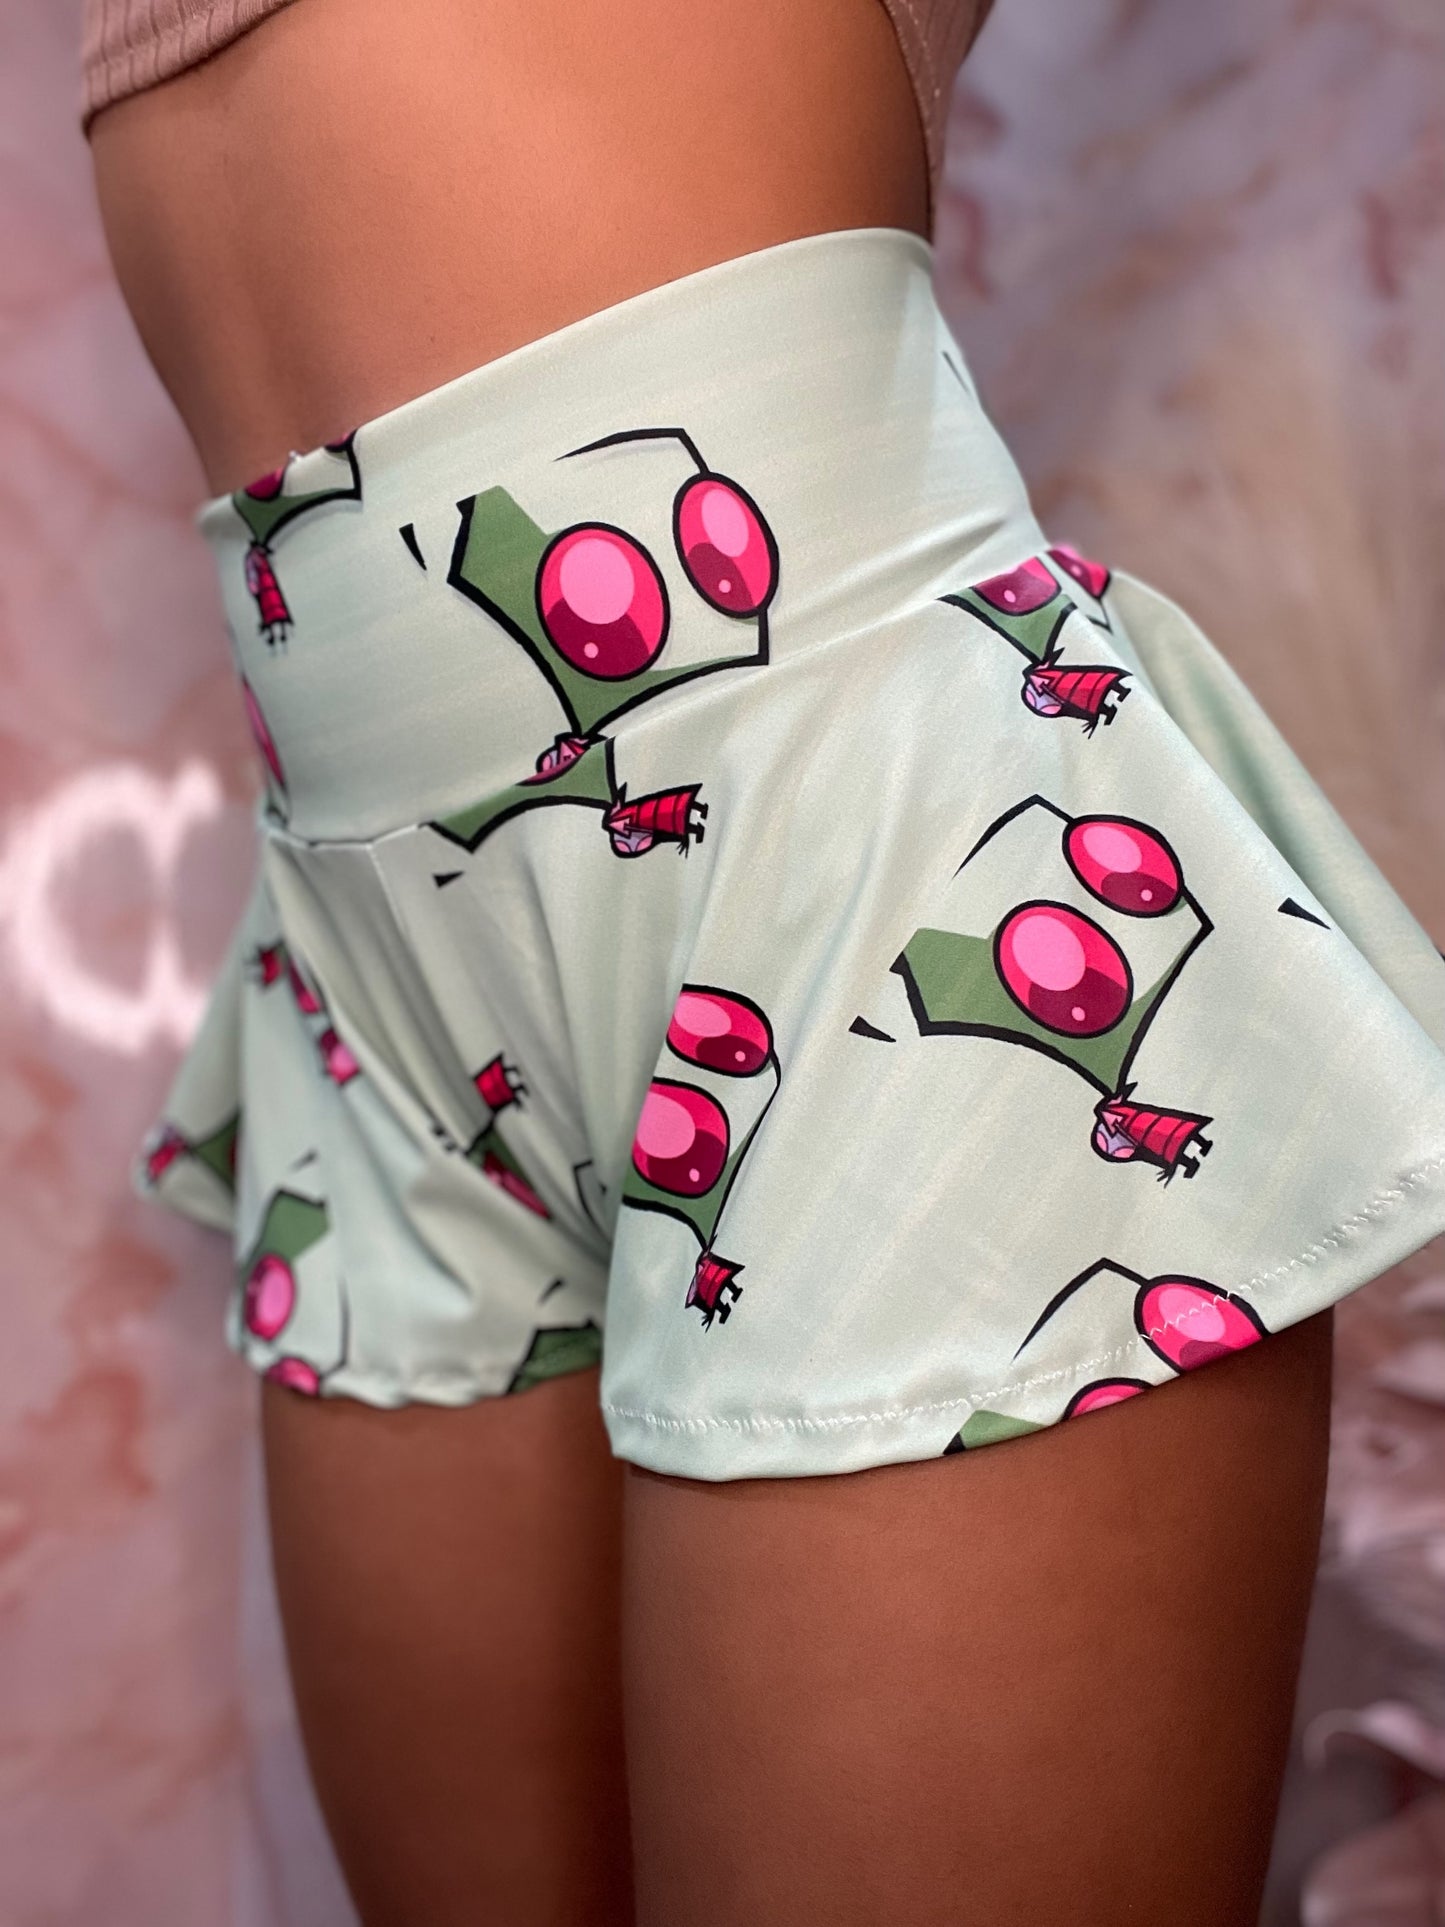 *MISHAP "INVADER” inspired shorties